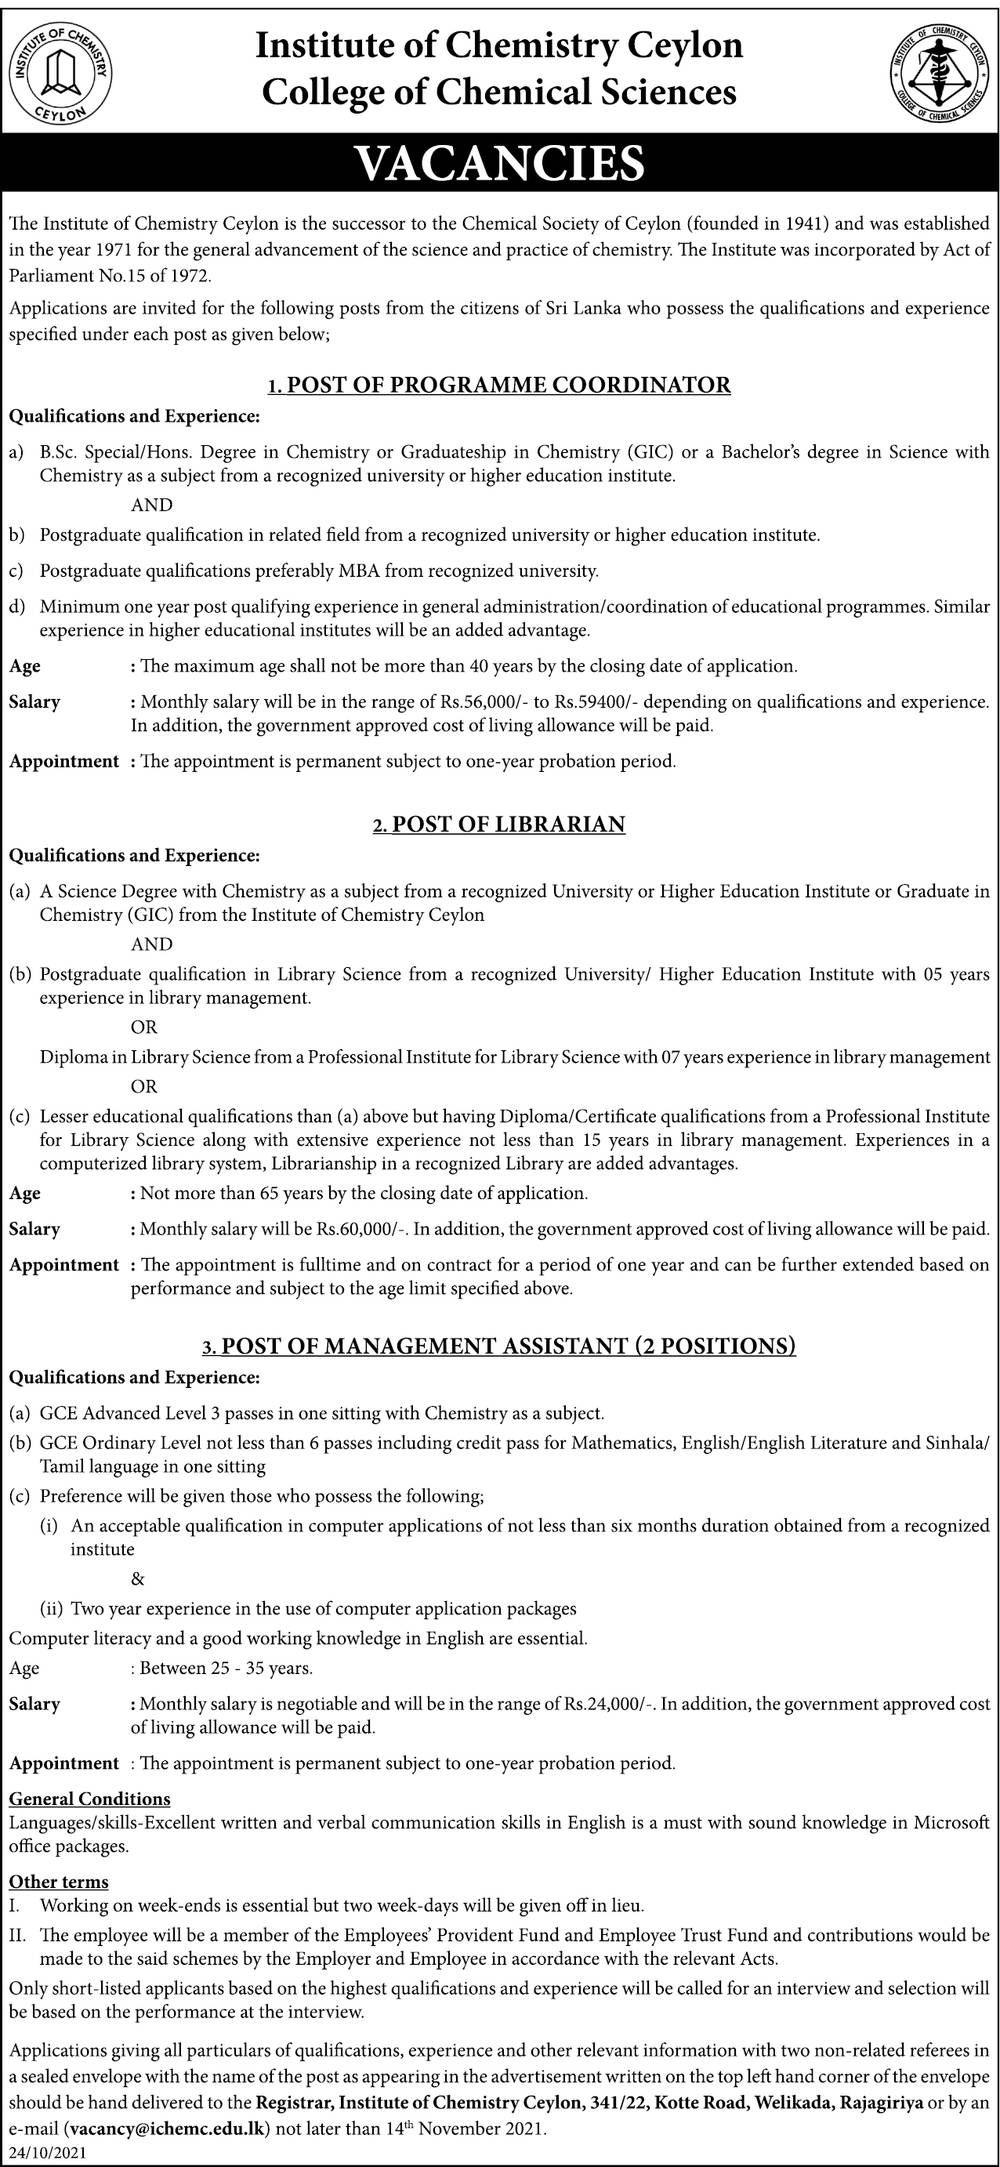 Management Assistant, Programme Coordinator, Librarian - Institute of Chemistry Ceylon English